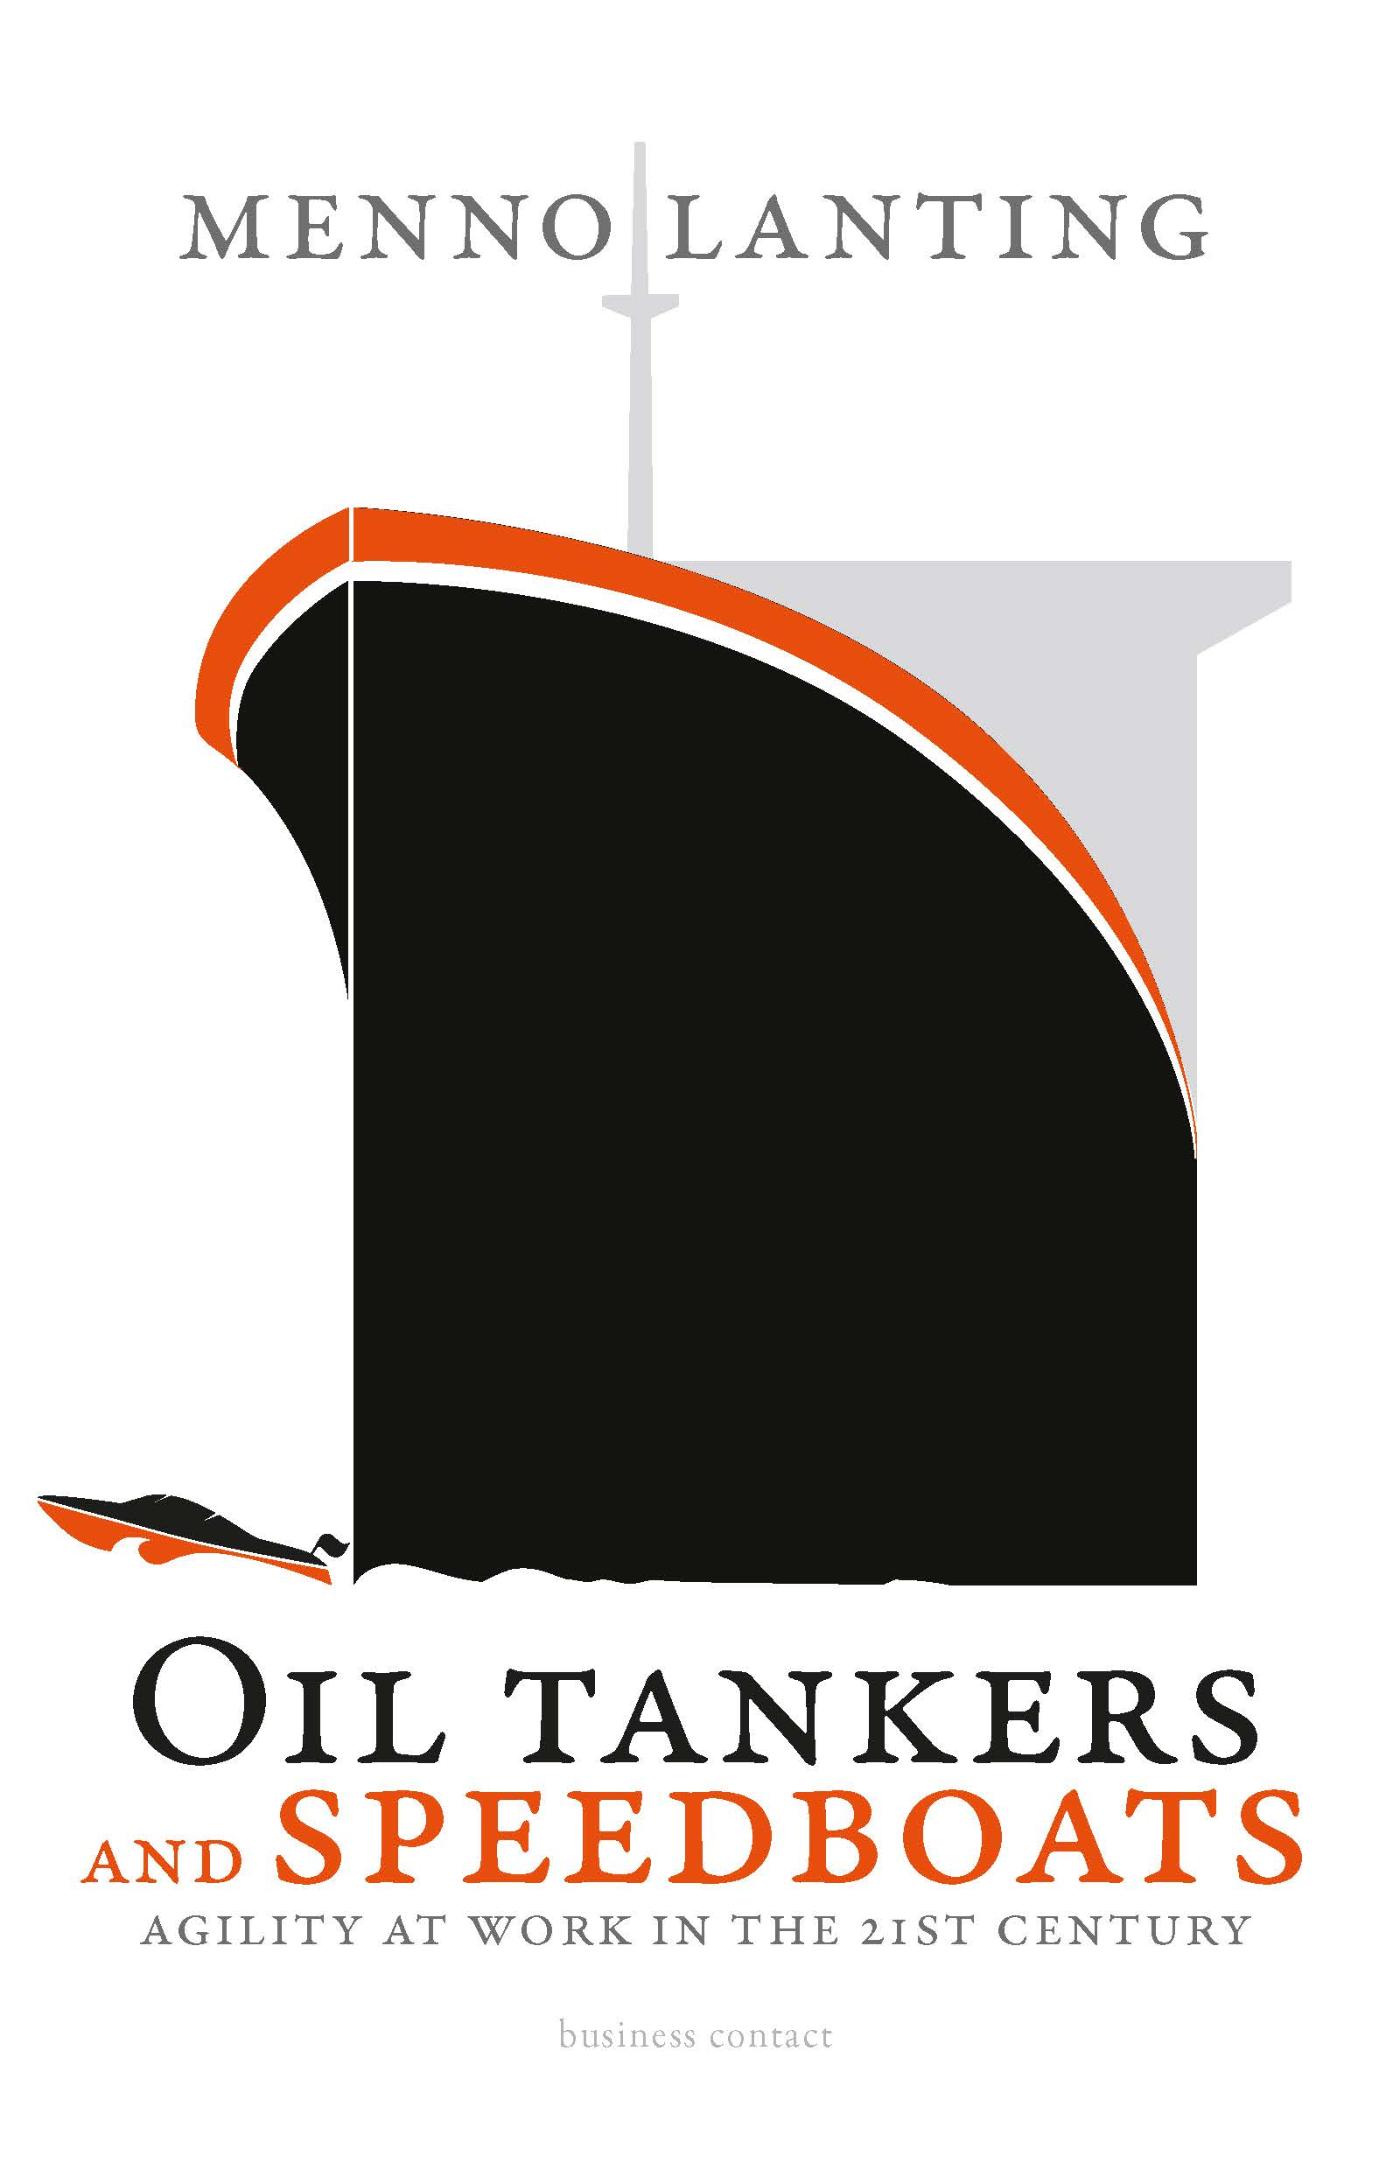 Oil tankers and speedboats (Ebook)